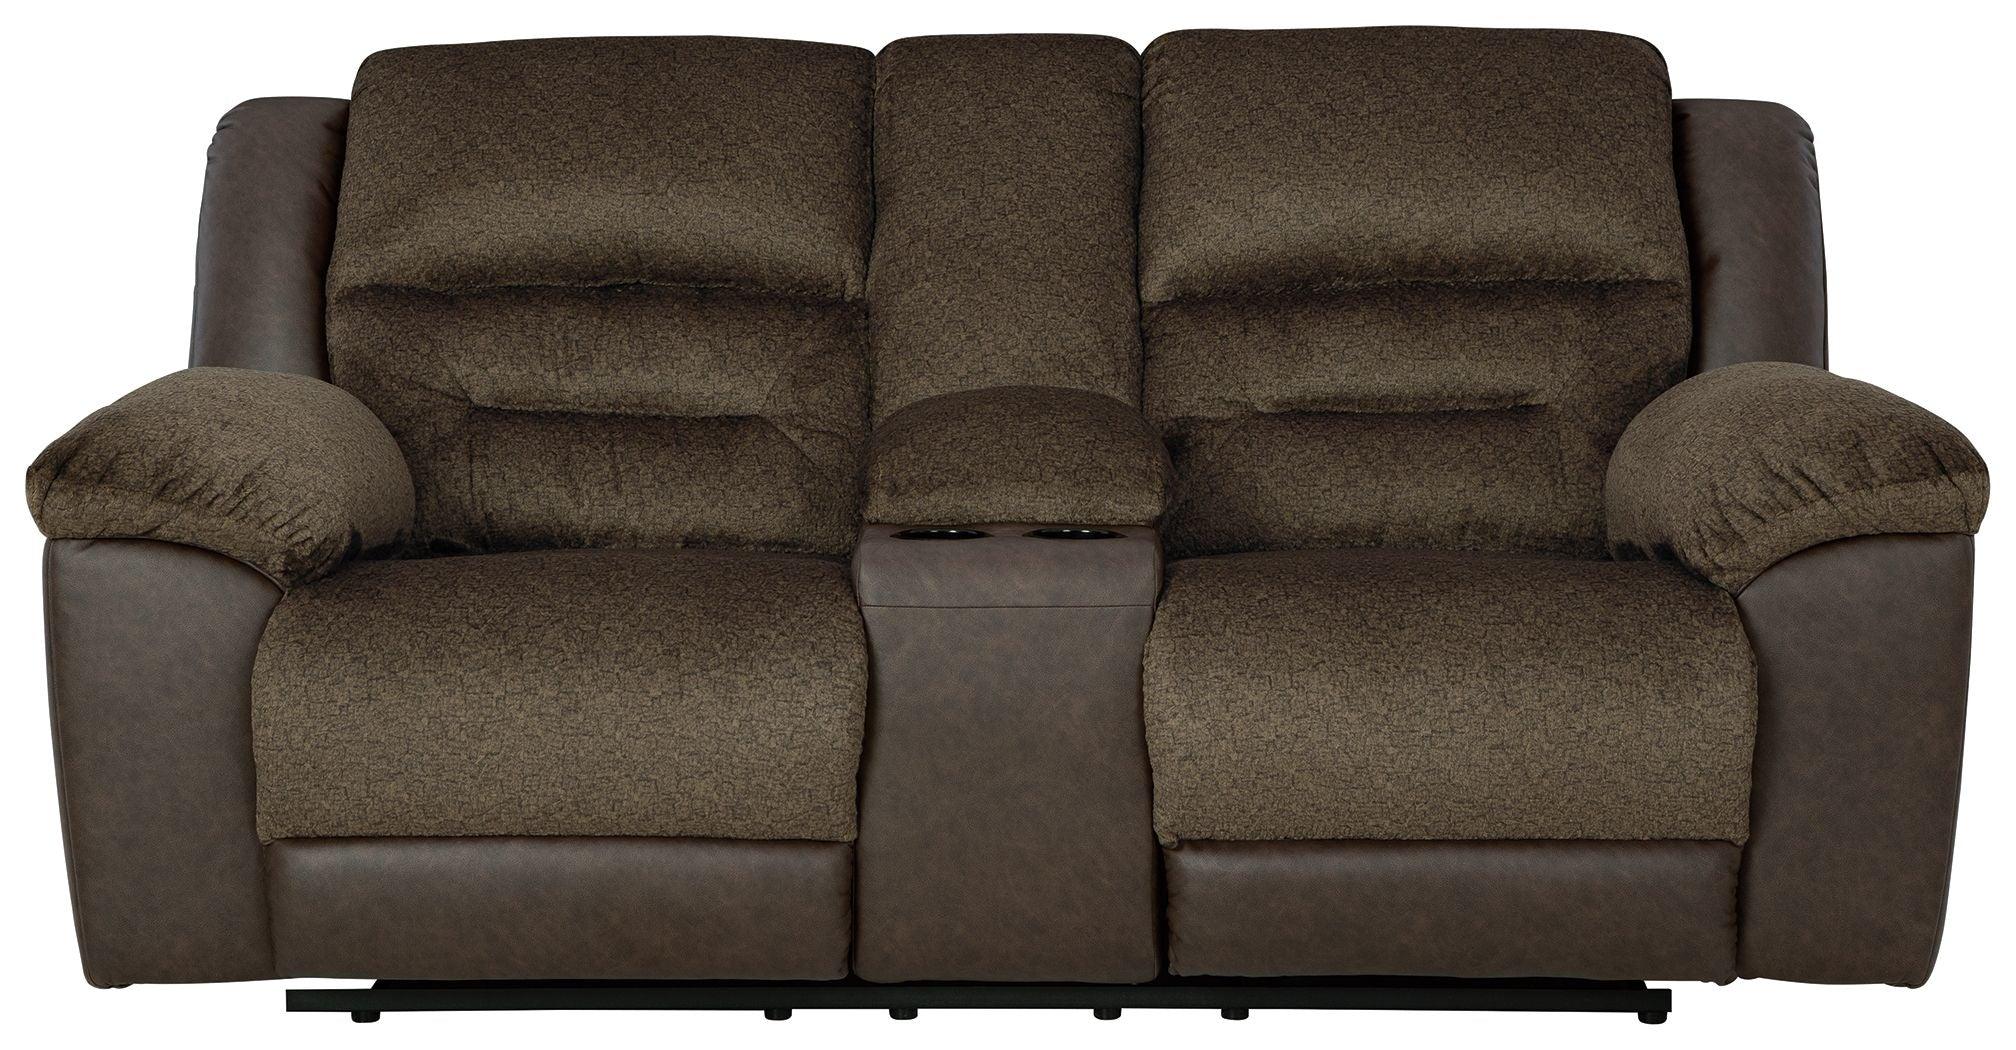 Benchcraft® - Dorman - Chocolate - Dbl Reclining Loveseat With Console - 5th Avenue Furniture